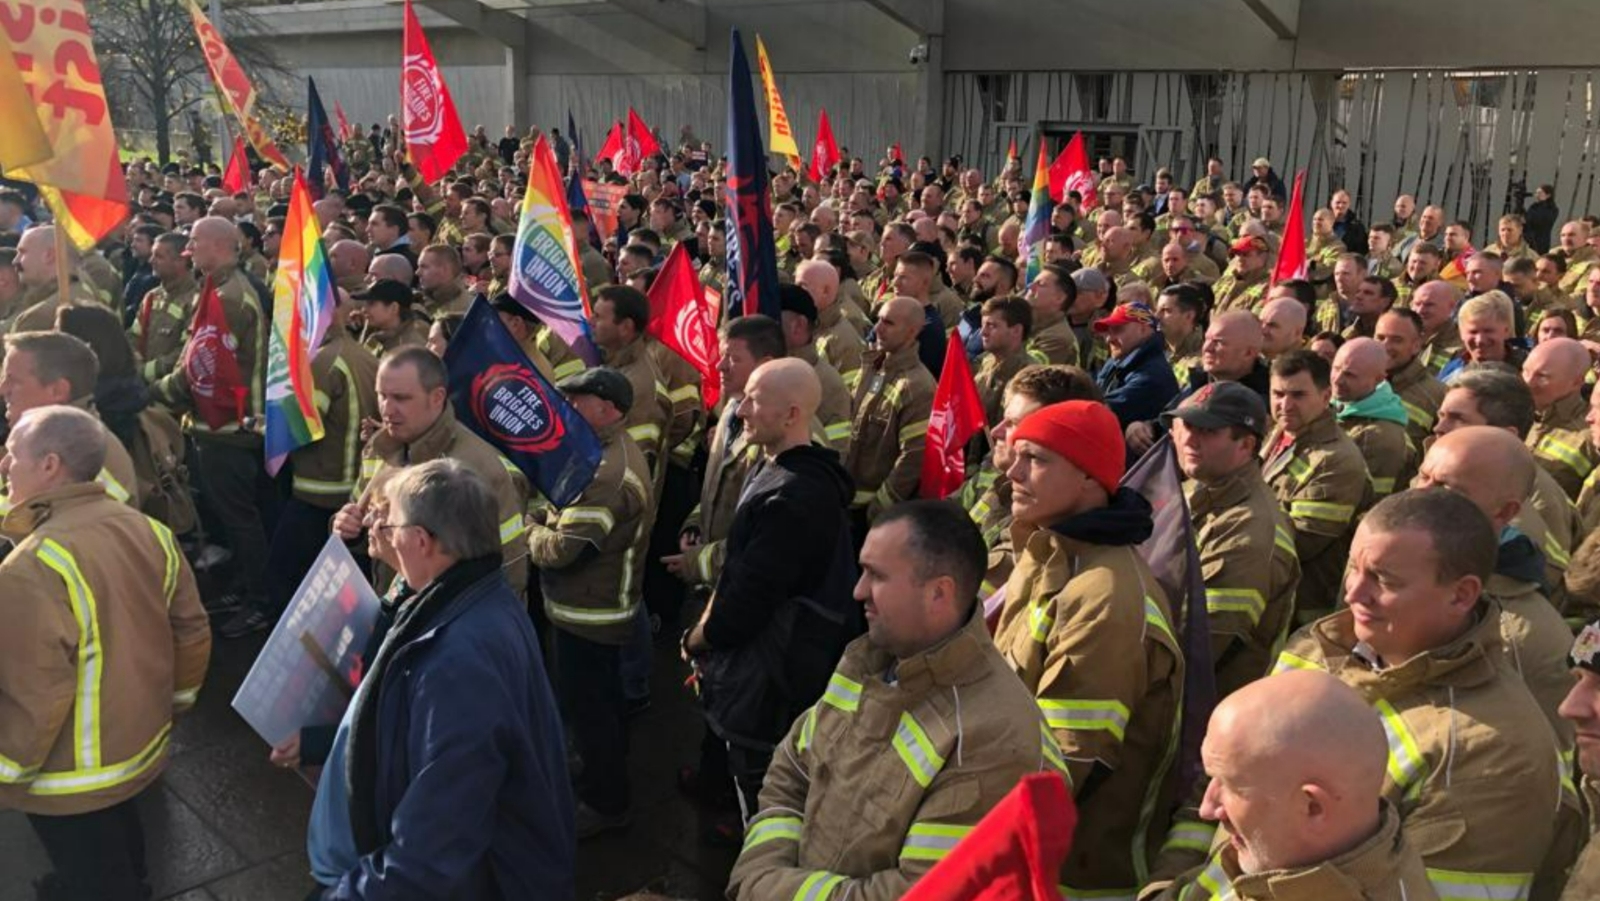 Around 500 firefighters and control room staff took part in the demonstration (STV News)